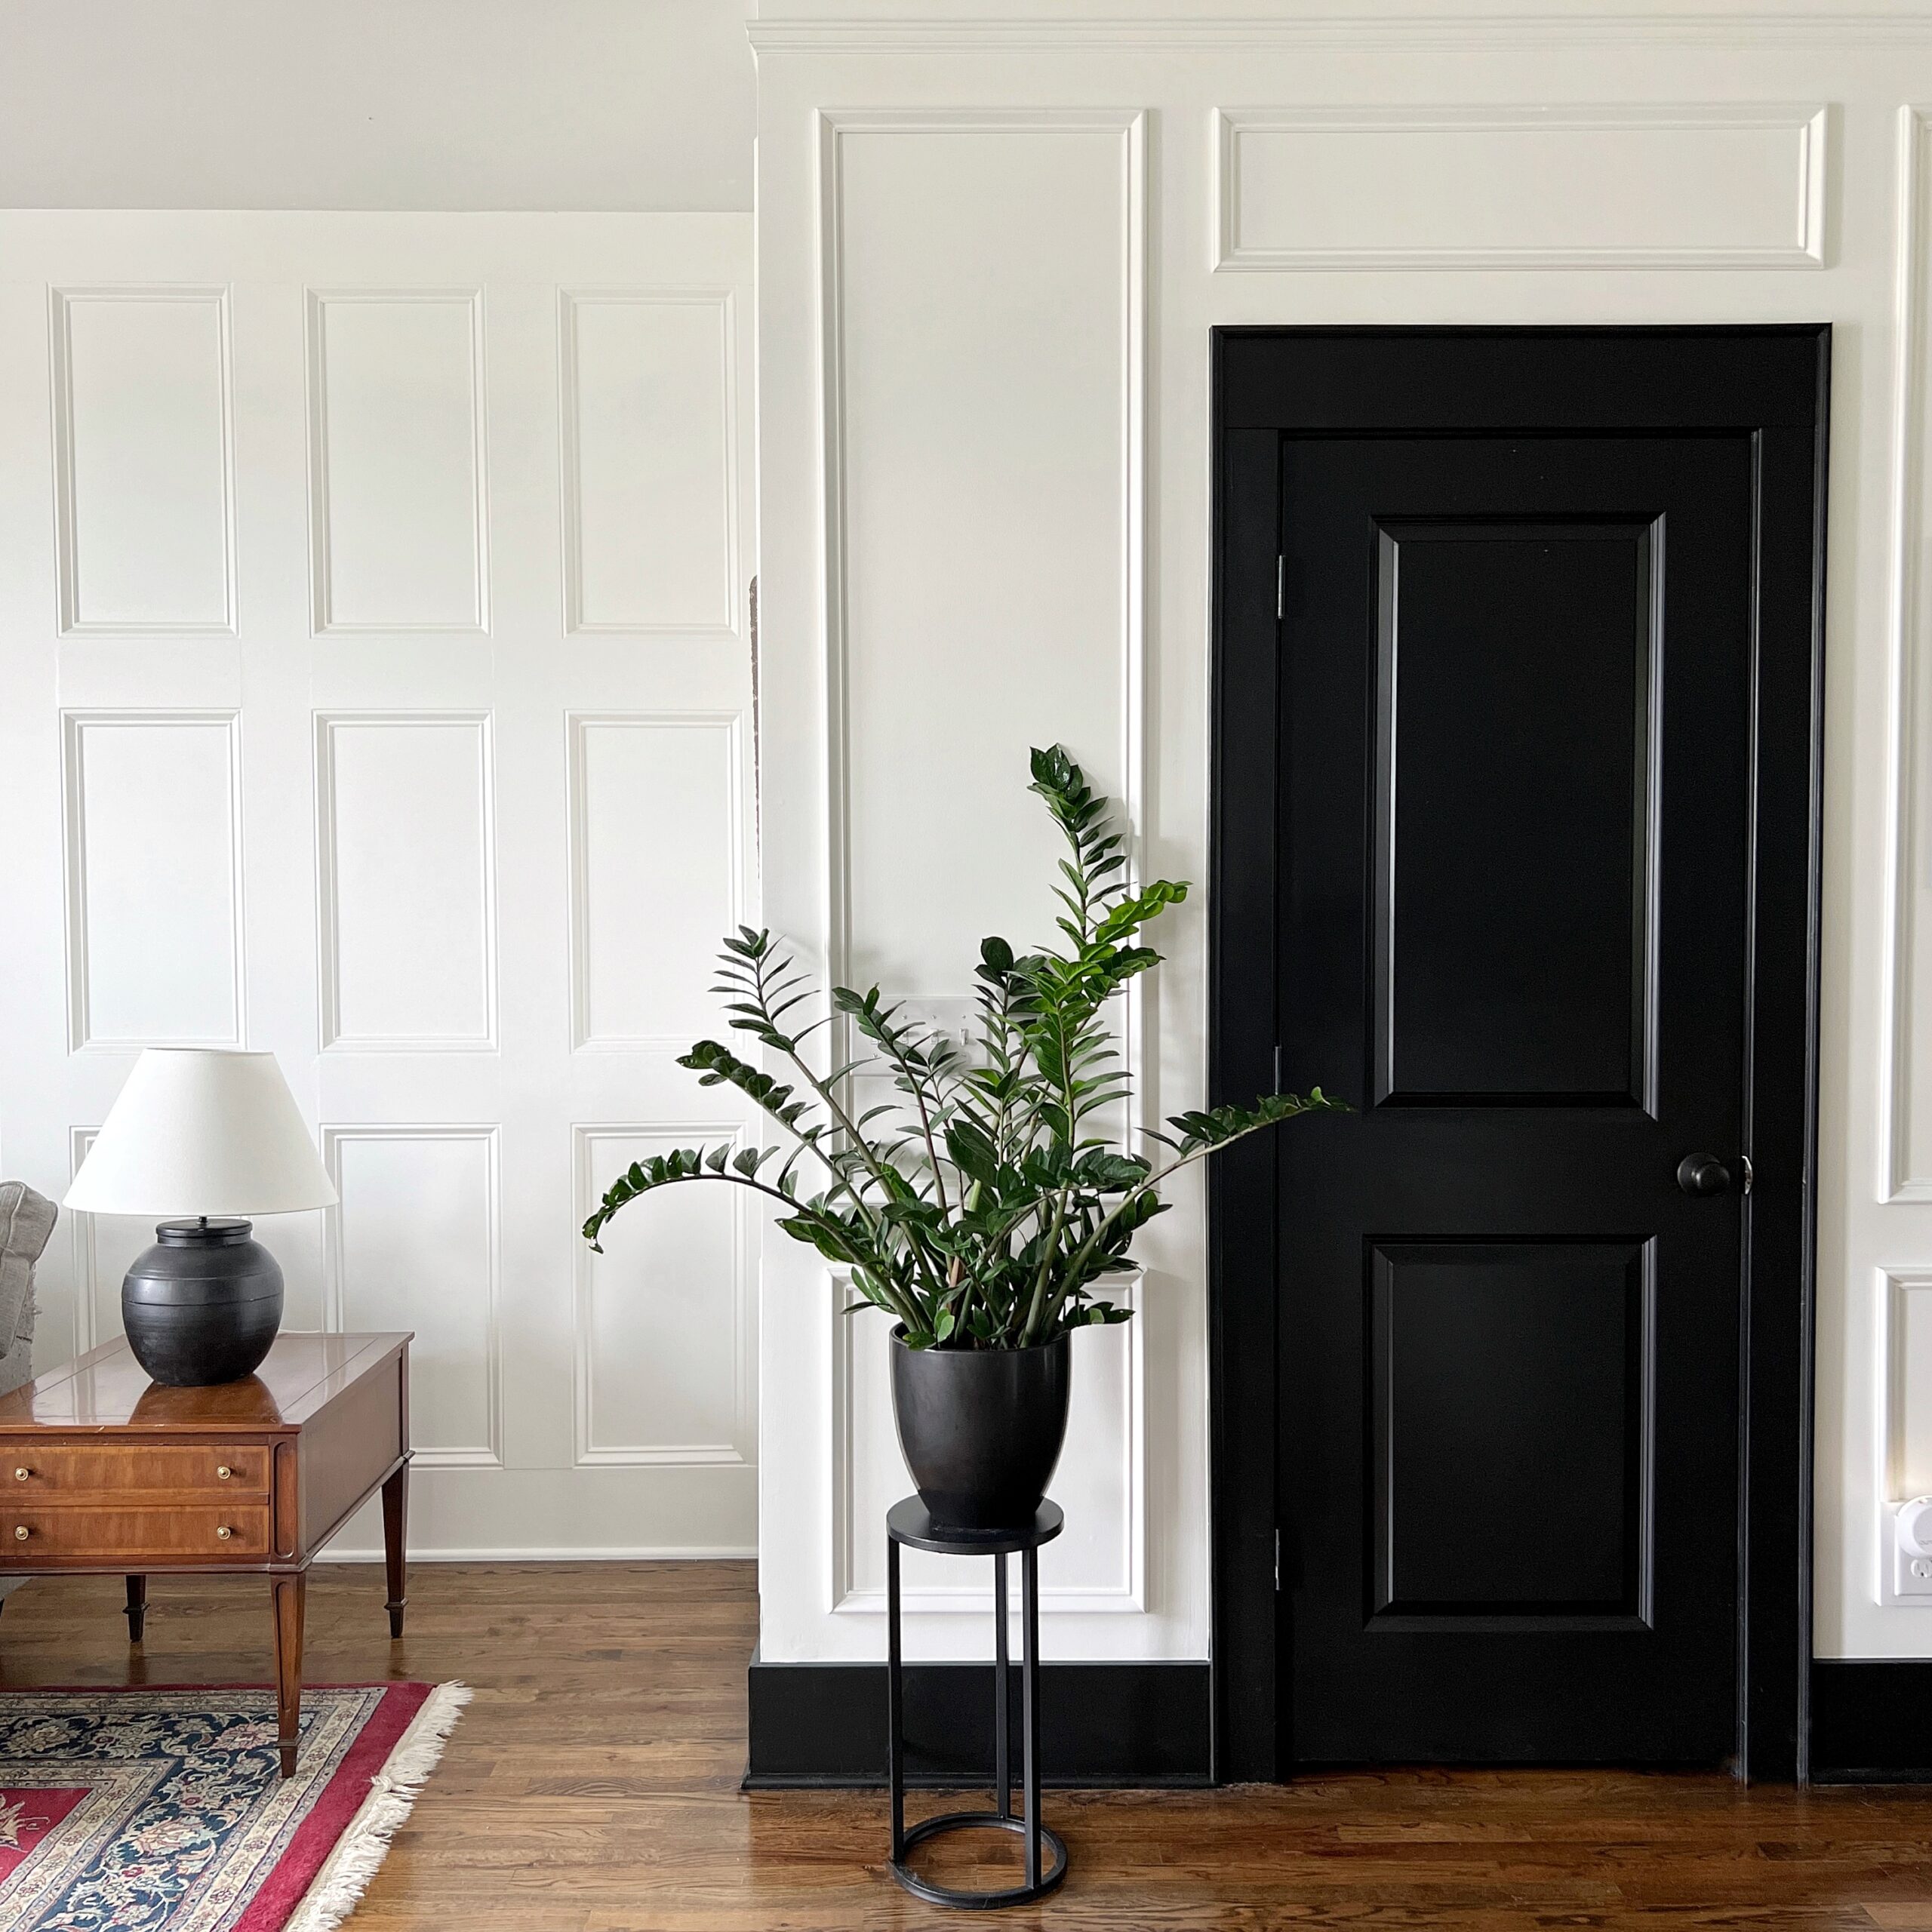 White walls with trim moulding and black interior trim and door in a satin finish